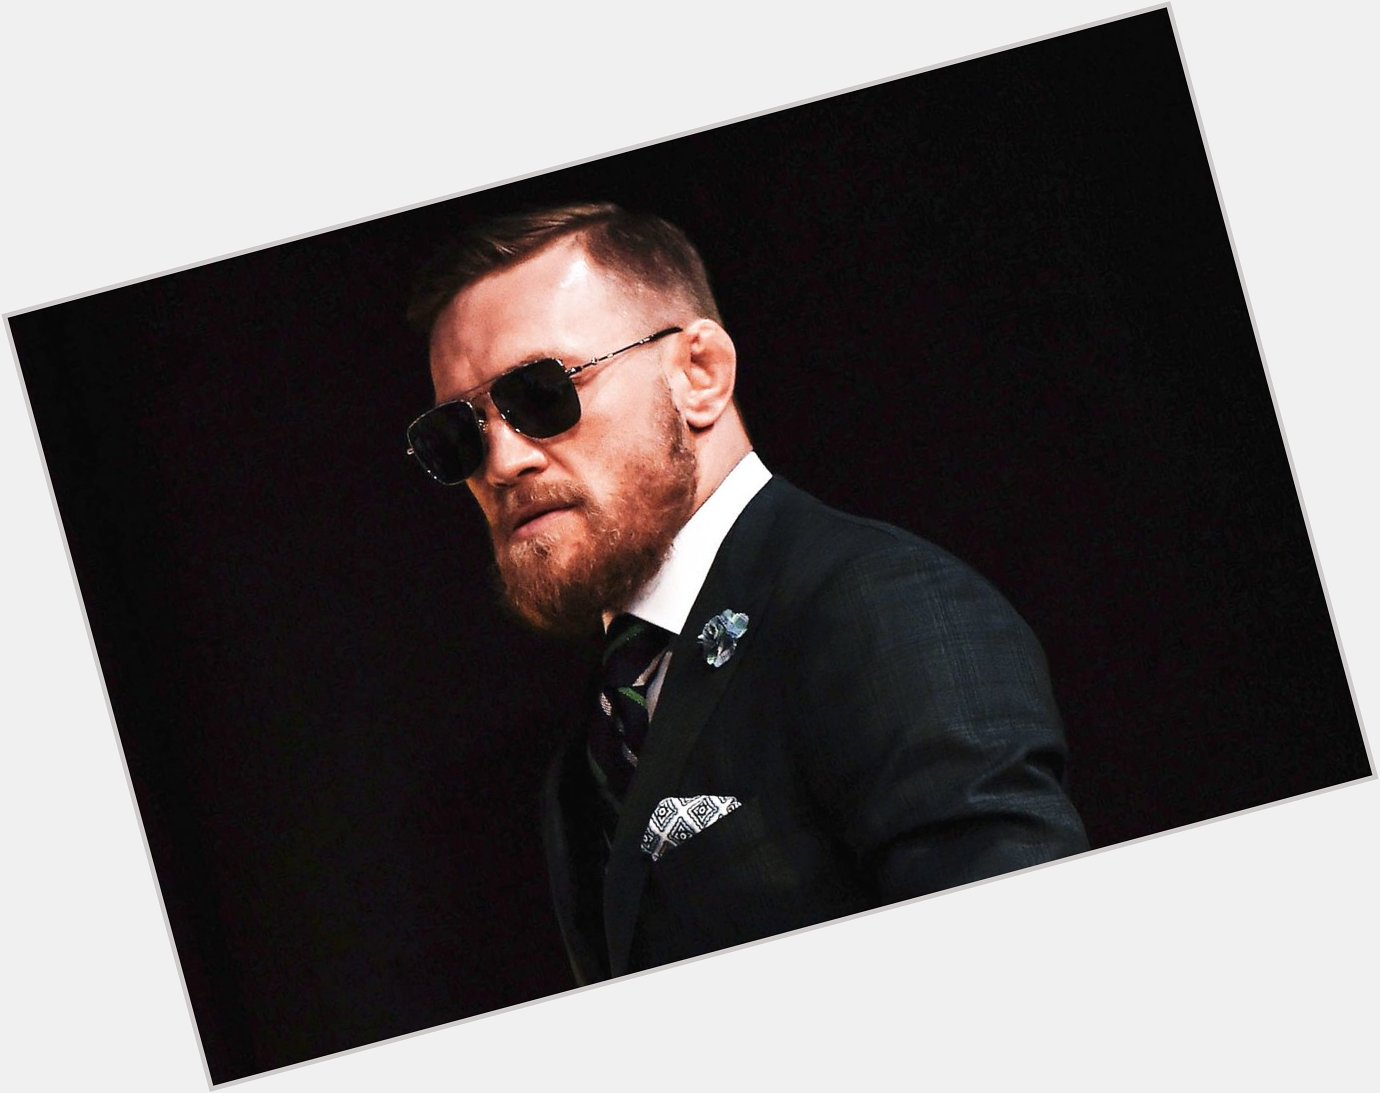 Face of the fooking fight game never change
Happy birthday the real CHAMP CHAMP Conor McGregor 